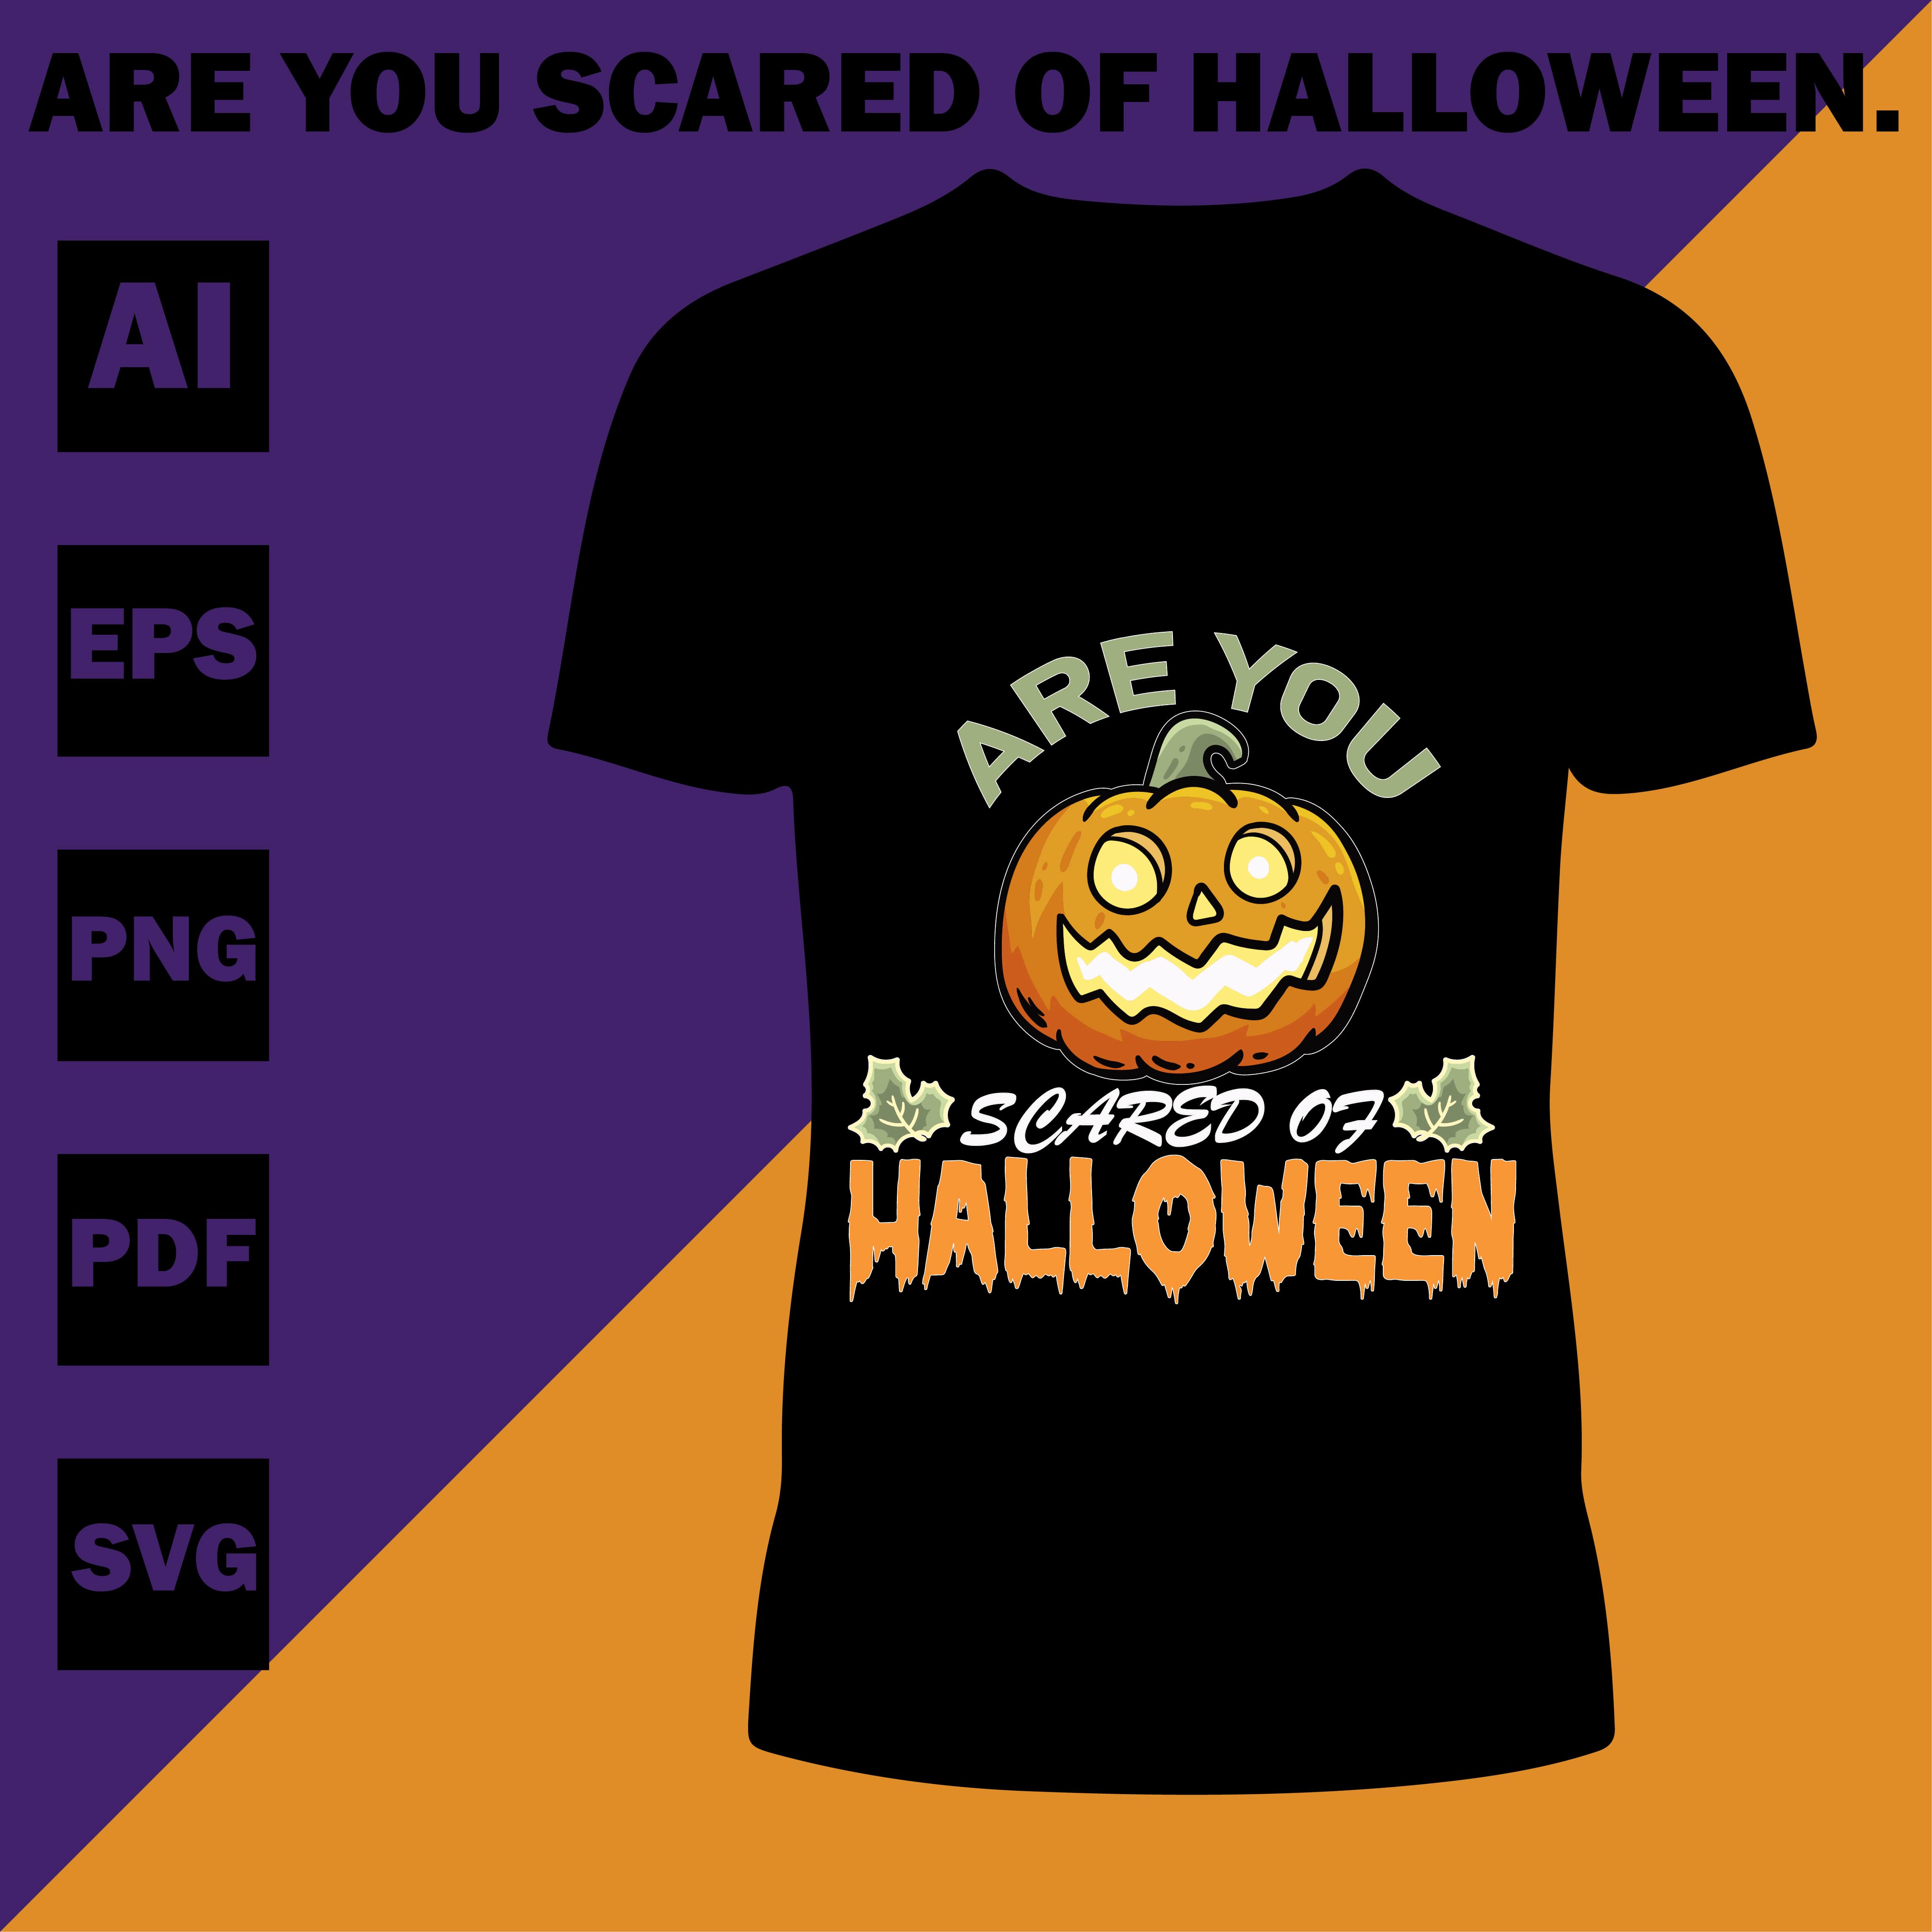 Are You Scared Of Halloween T-Shirt Design cover image.